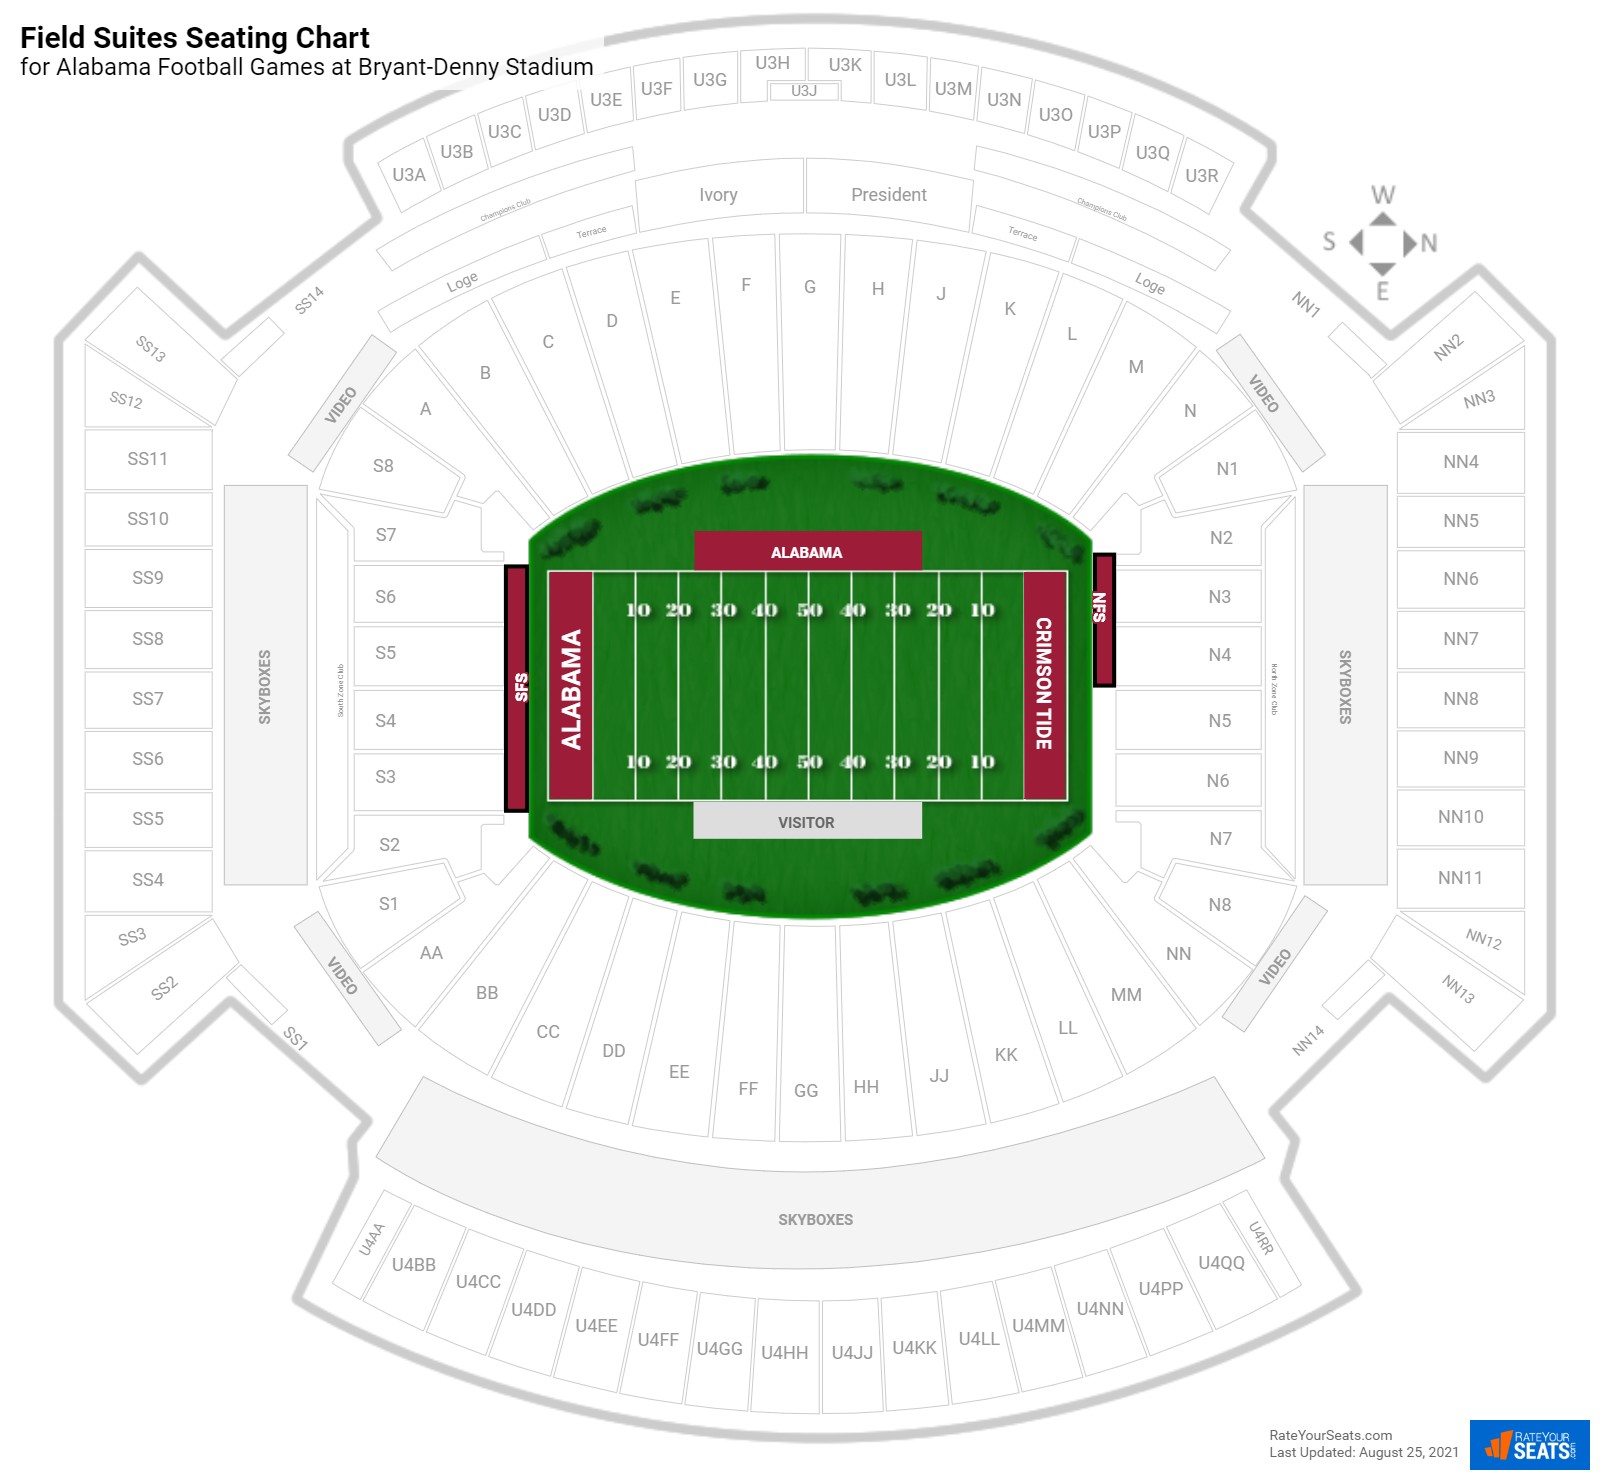 Alabama Field Suites Seating Chart at Bryant-Denny Stadium